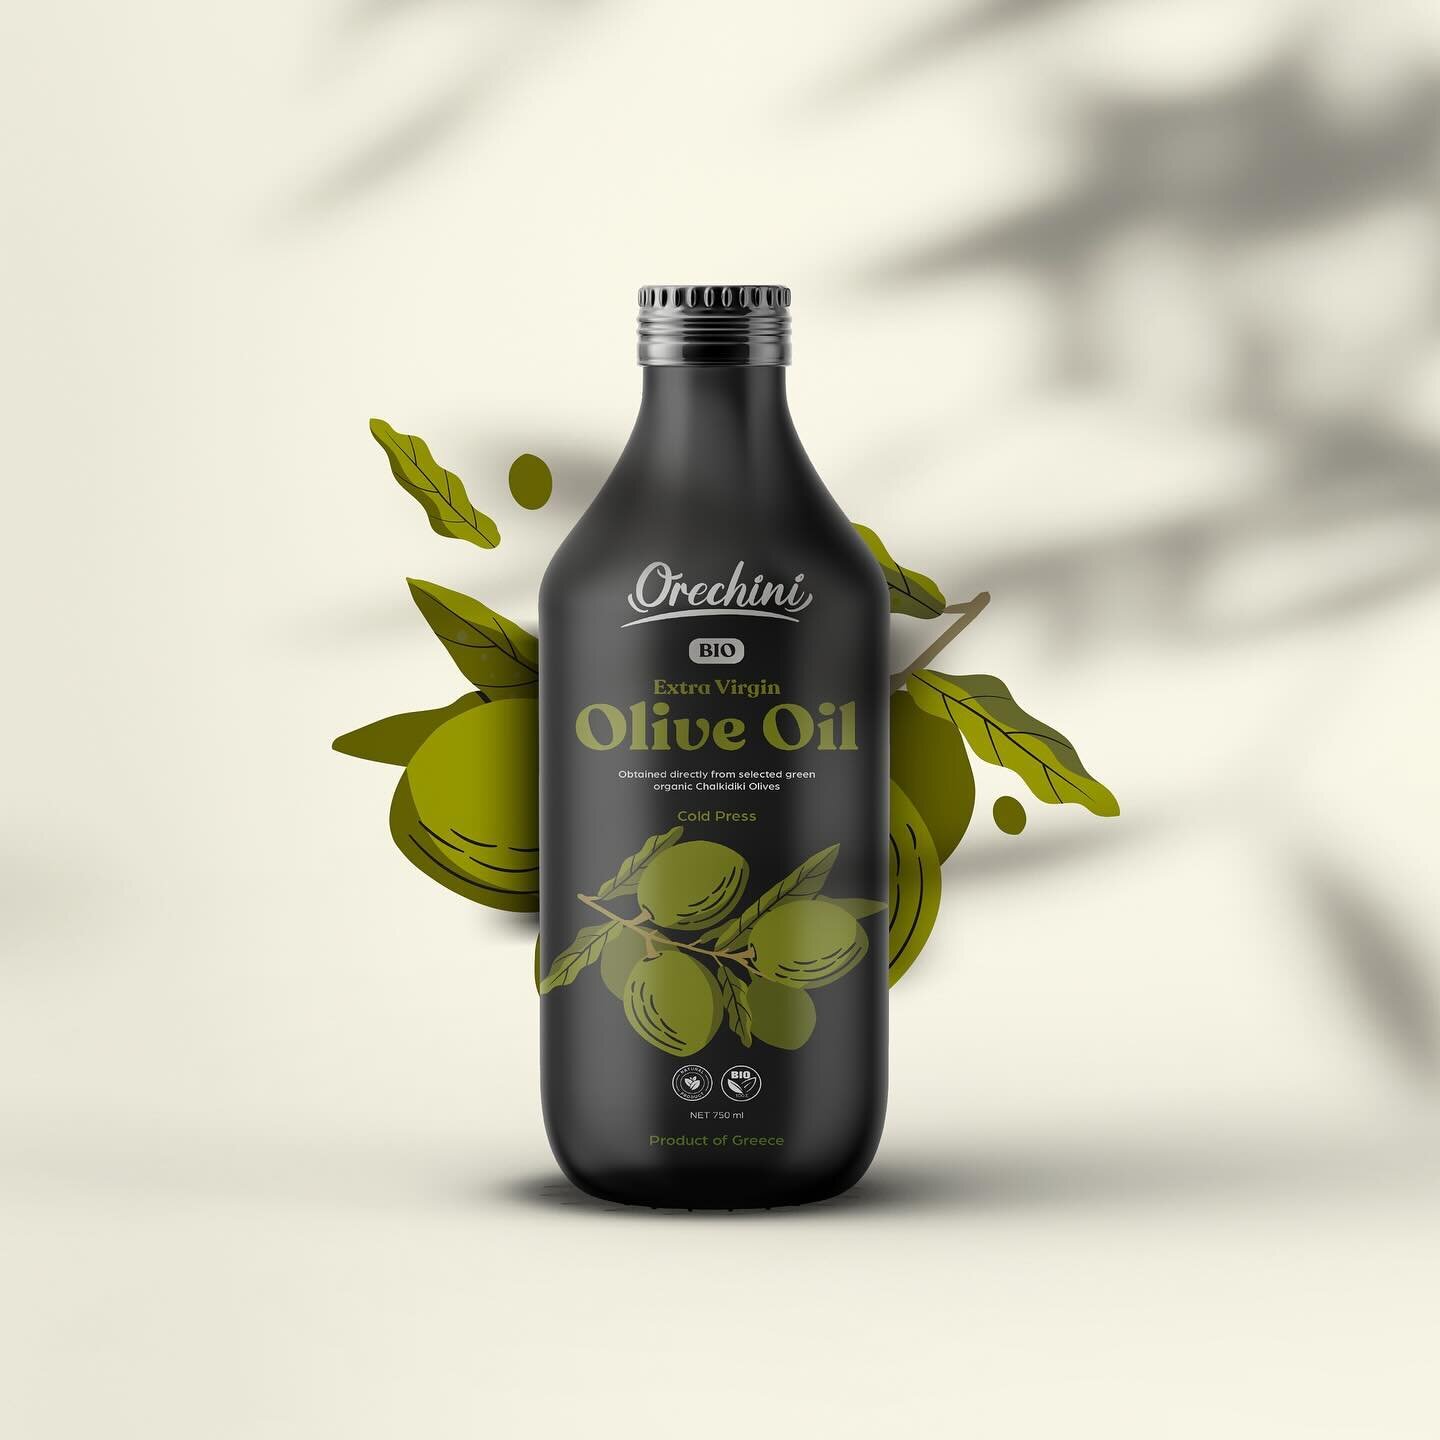 Designing for Orechini packaging at @barney.studio was one of those projects that give you pleasure and excitement once you see them on the shelf. The label design for Orechini Olive Oil focuses on a clean layout that allows soft pastel colors and il